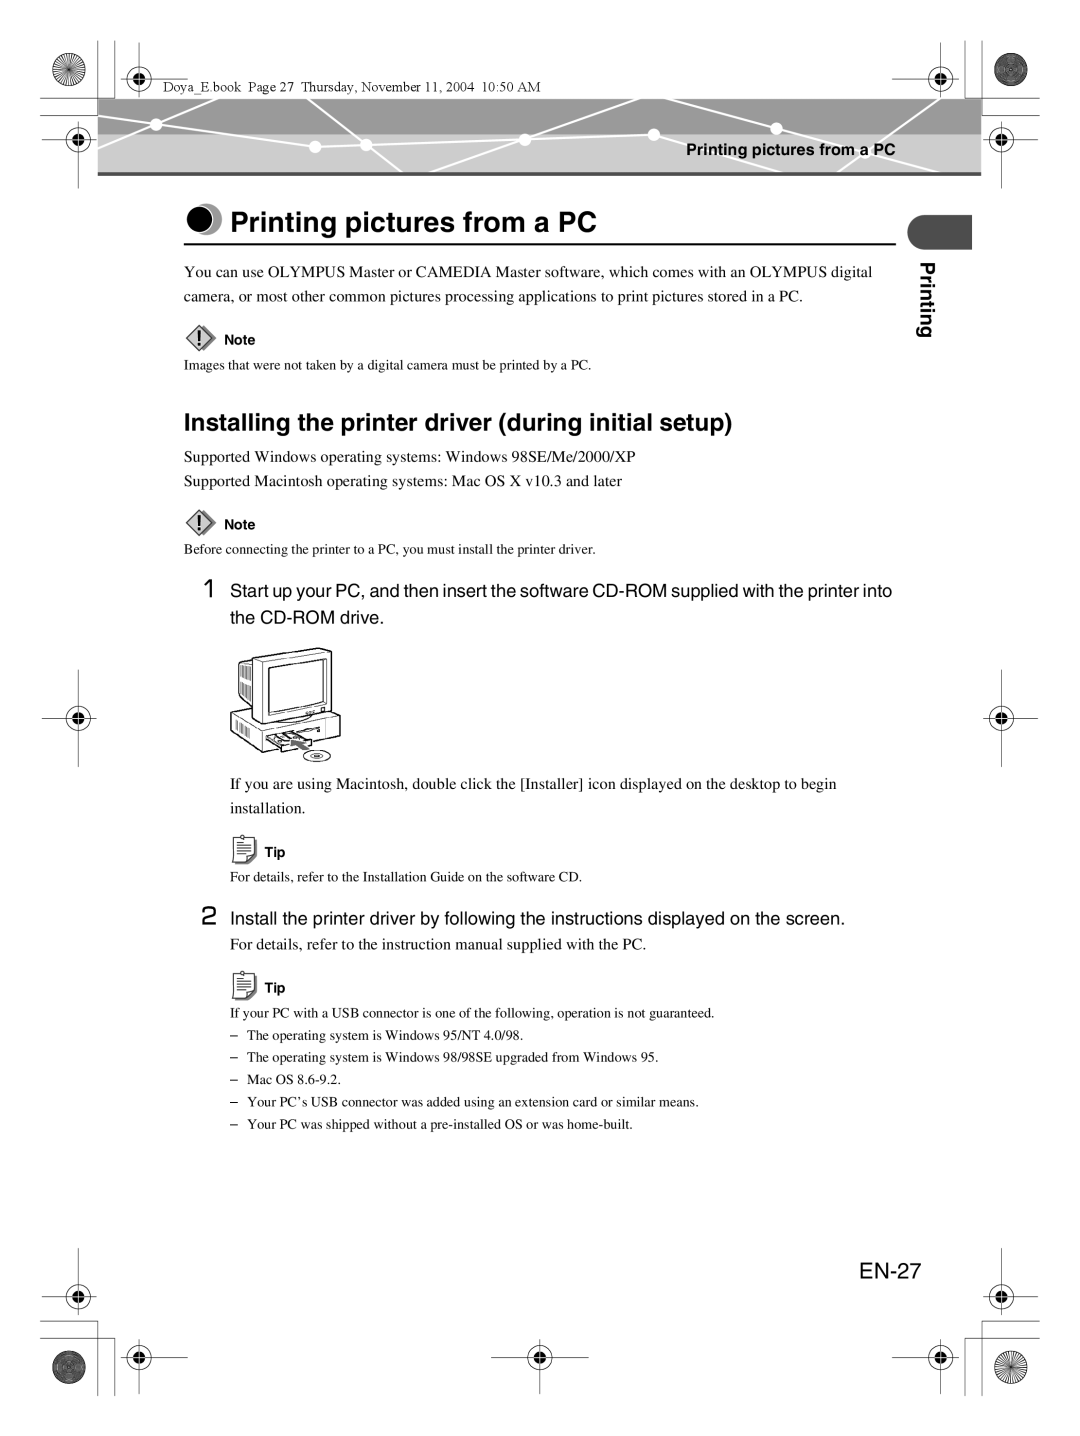 Olympus P-S100 user manual Printing pictures from a PC, Installing the printer driver during initial setup, EN-27 